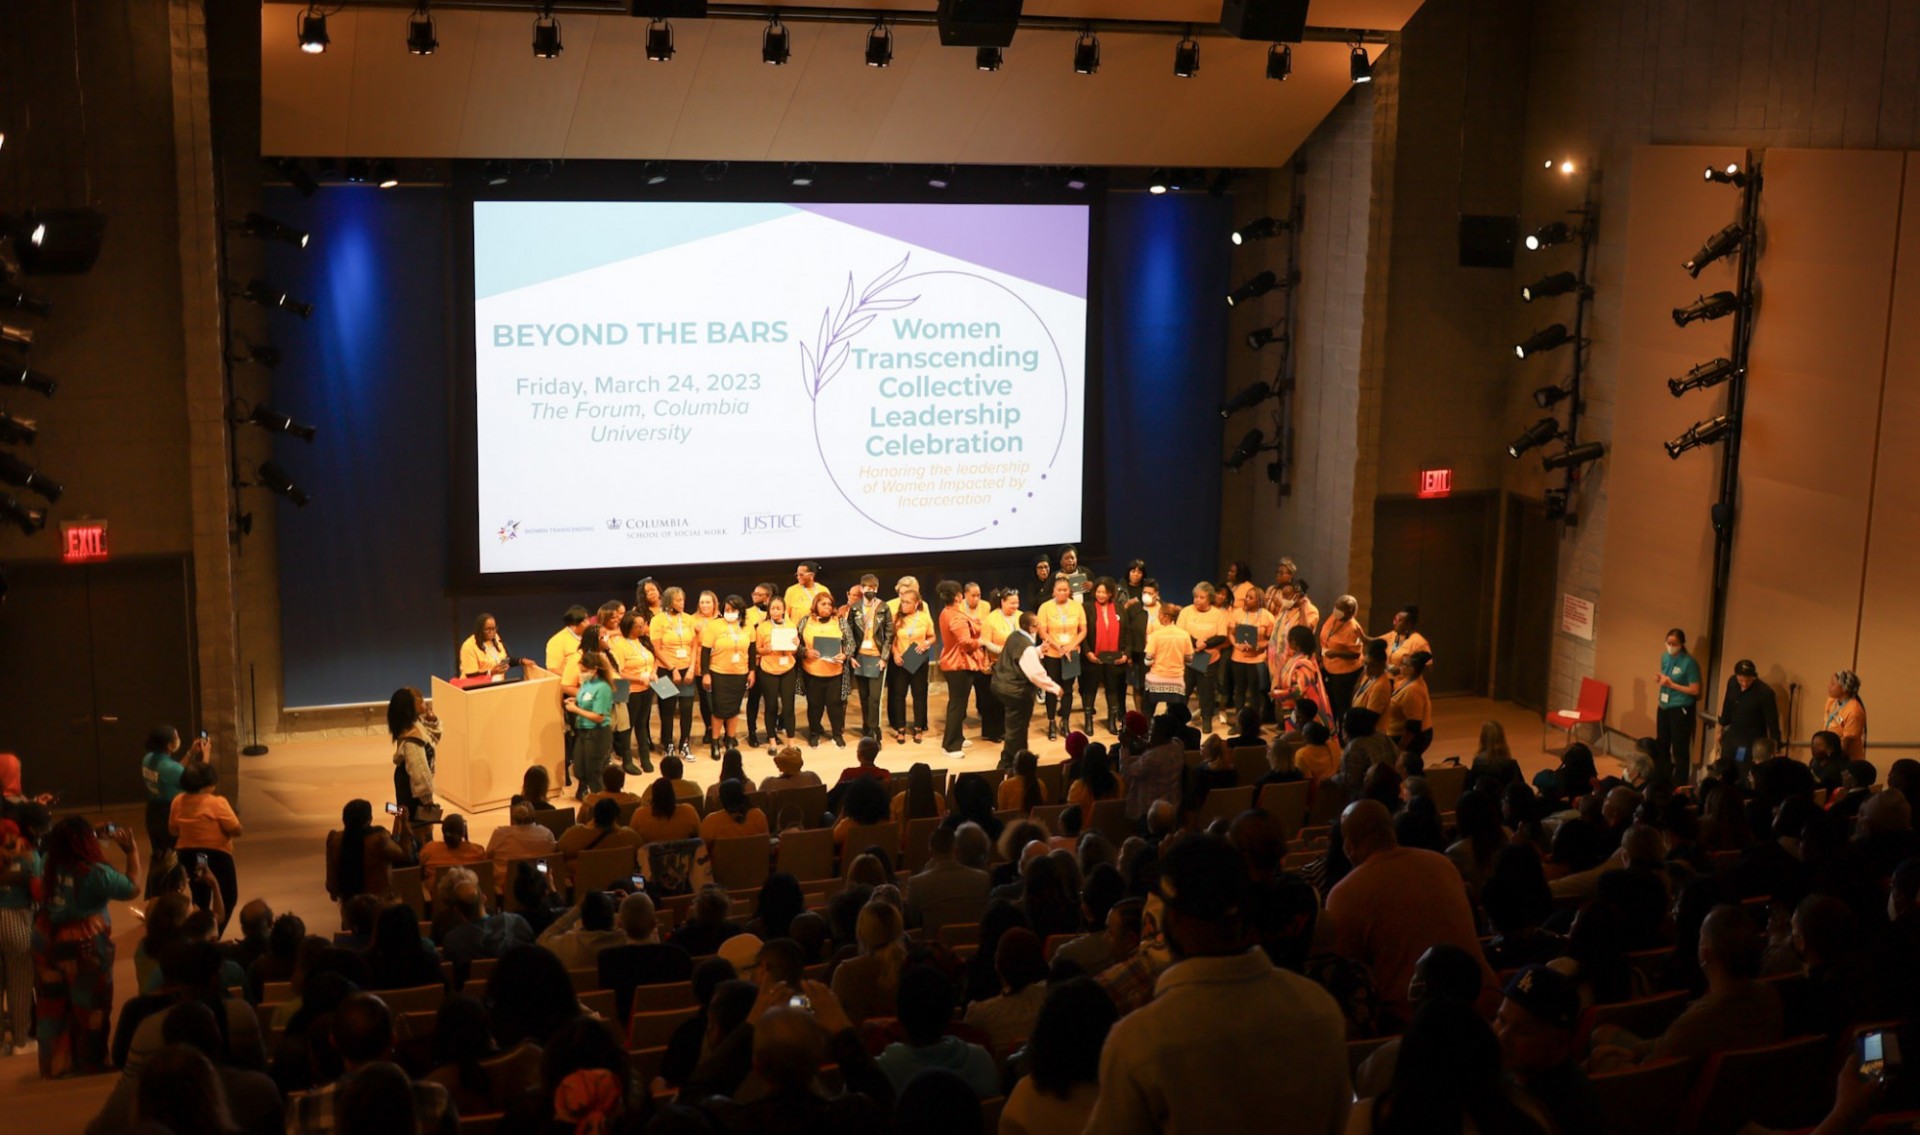 wide shot of the room/audience with a group on stage in yellow tshirts and a screen in the background that says "Women Transcending Collective Leadership Celebration: